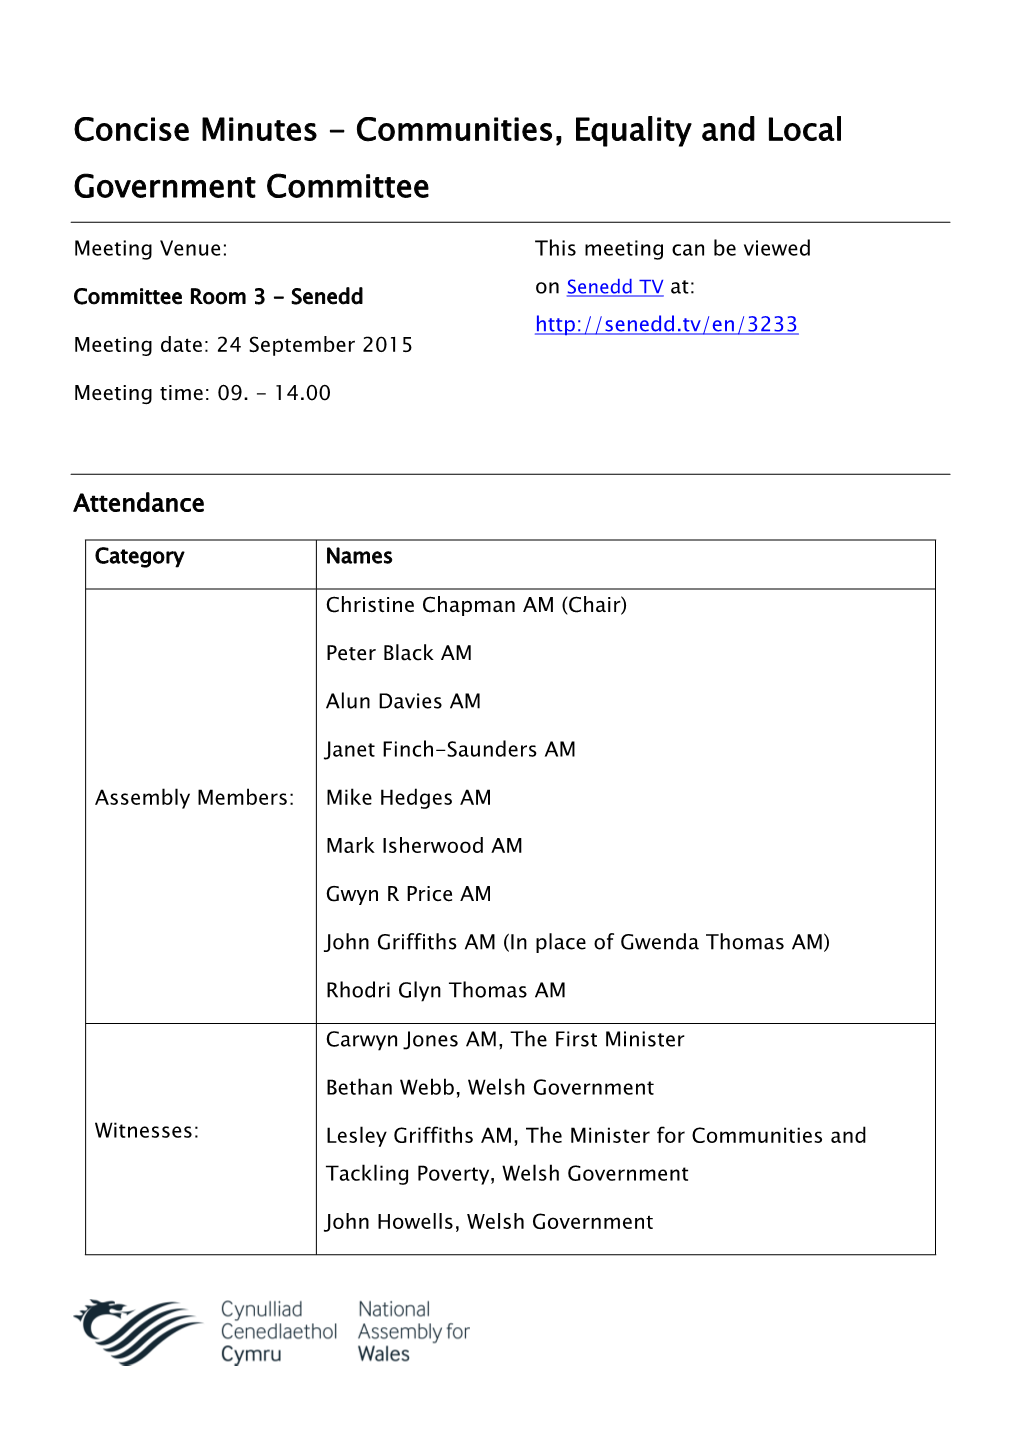 Concise Minutes - Communities, Equality and Local Government Committee